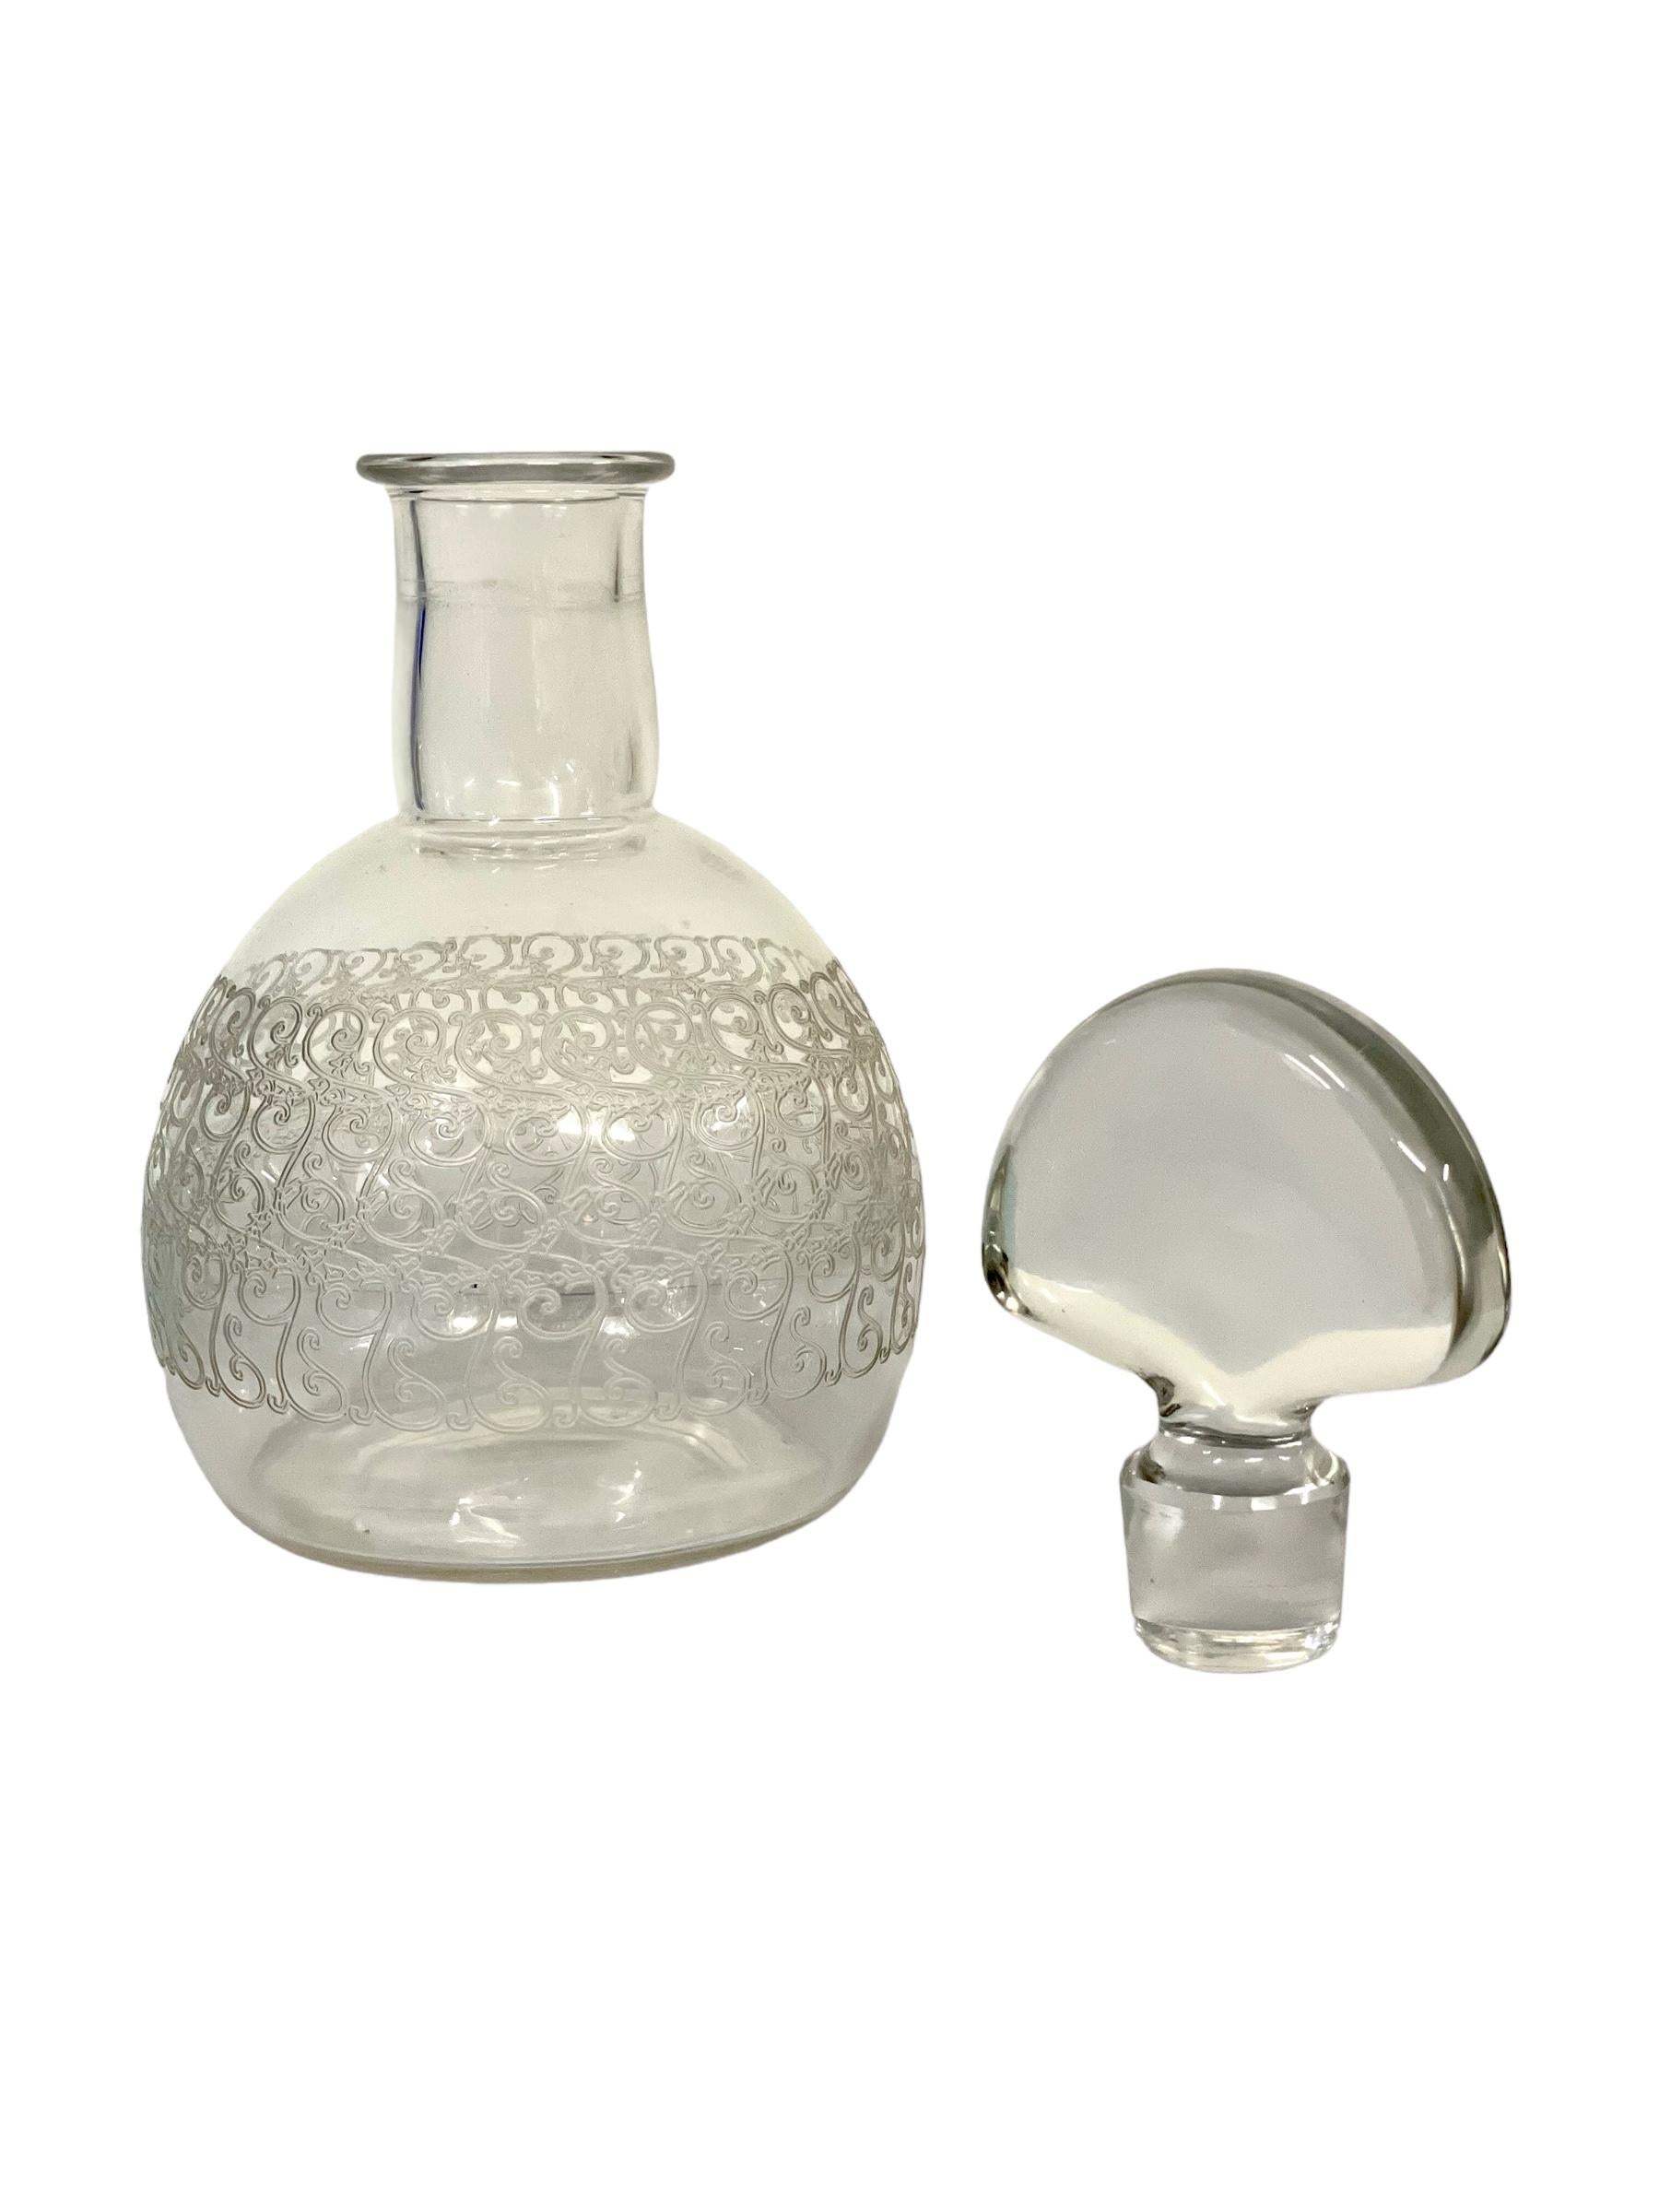 A stunning crystal wine decanter with stopper from the renowned house of Baccarat, part of the exquisite 'Rohan' collection. Decorated in a wide band across its wide bowl with a recurring S-shaped swirling motif, beautifully coiled and delicately